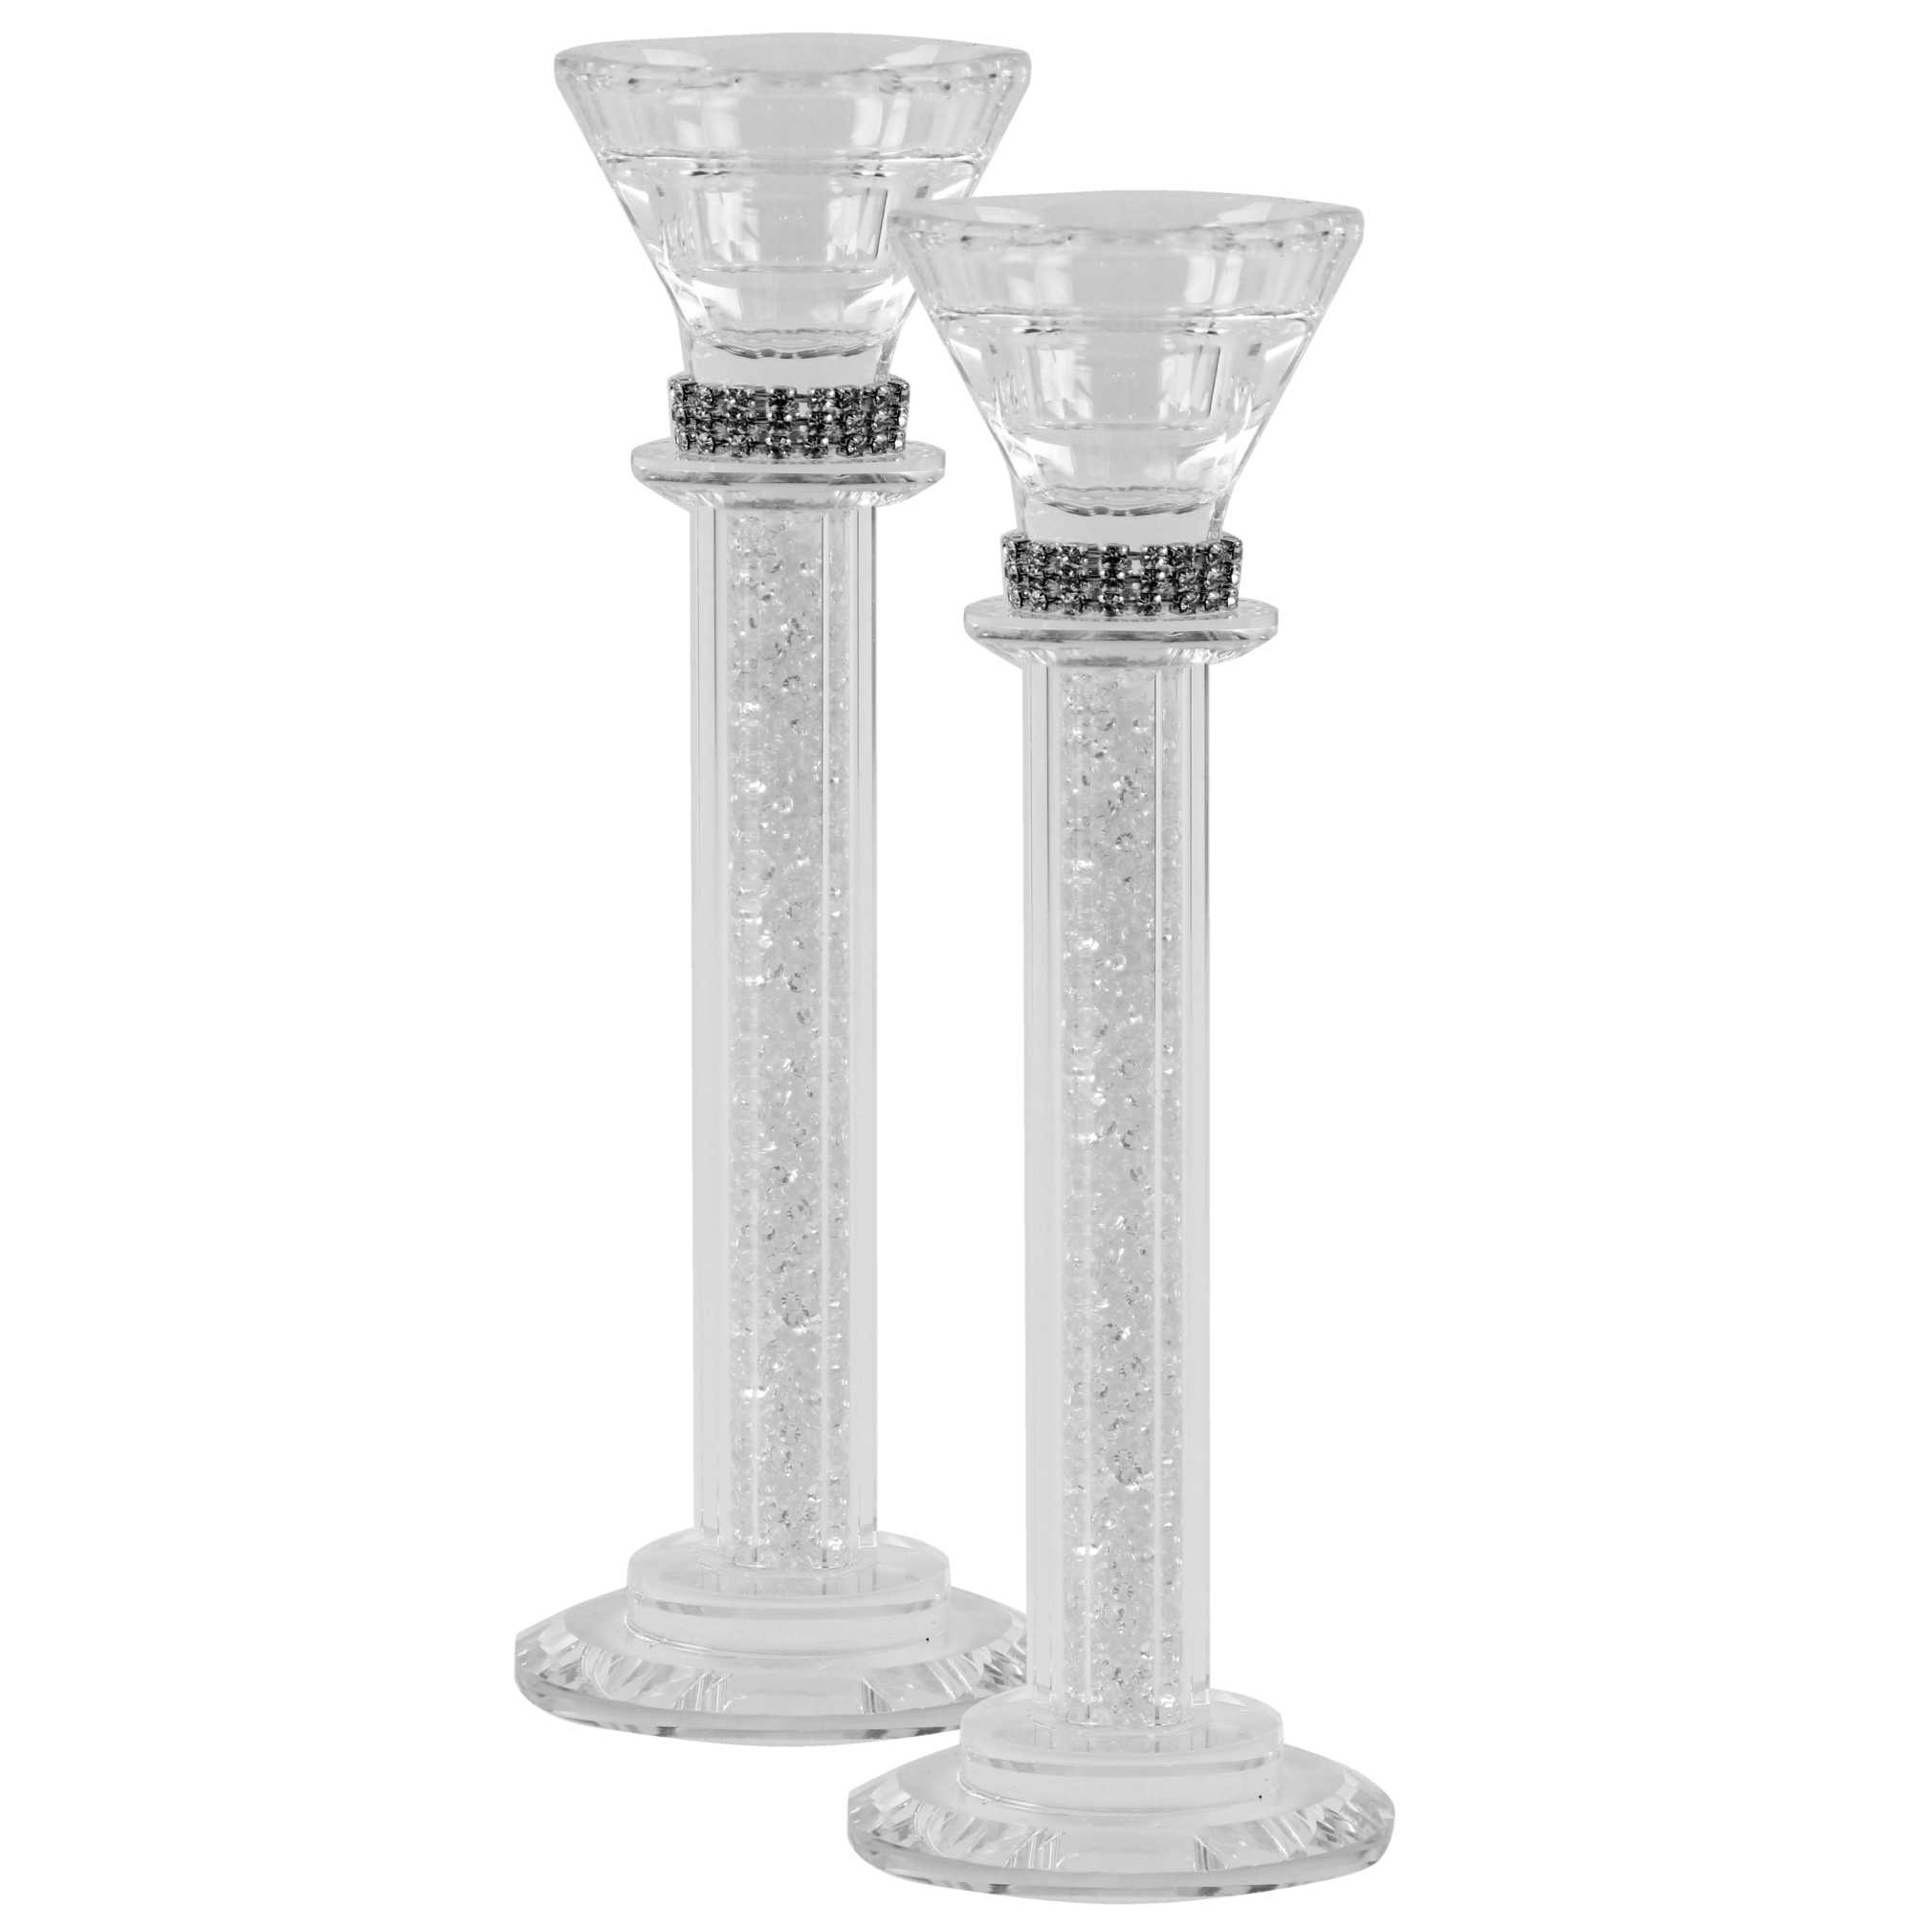 Crystal Candlesticks With Light Silver Stone Filling